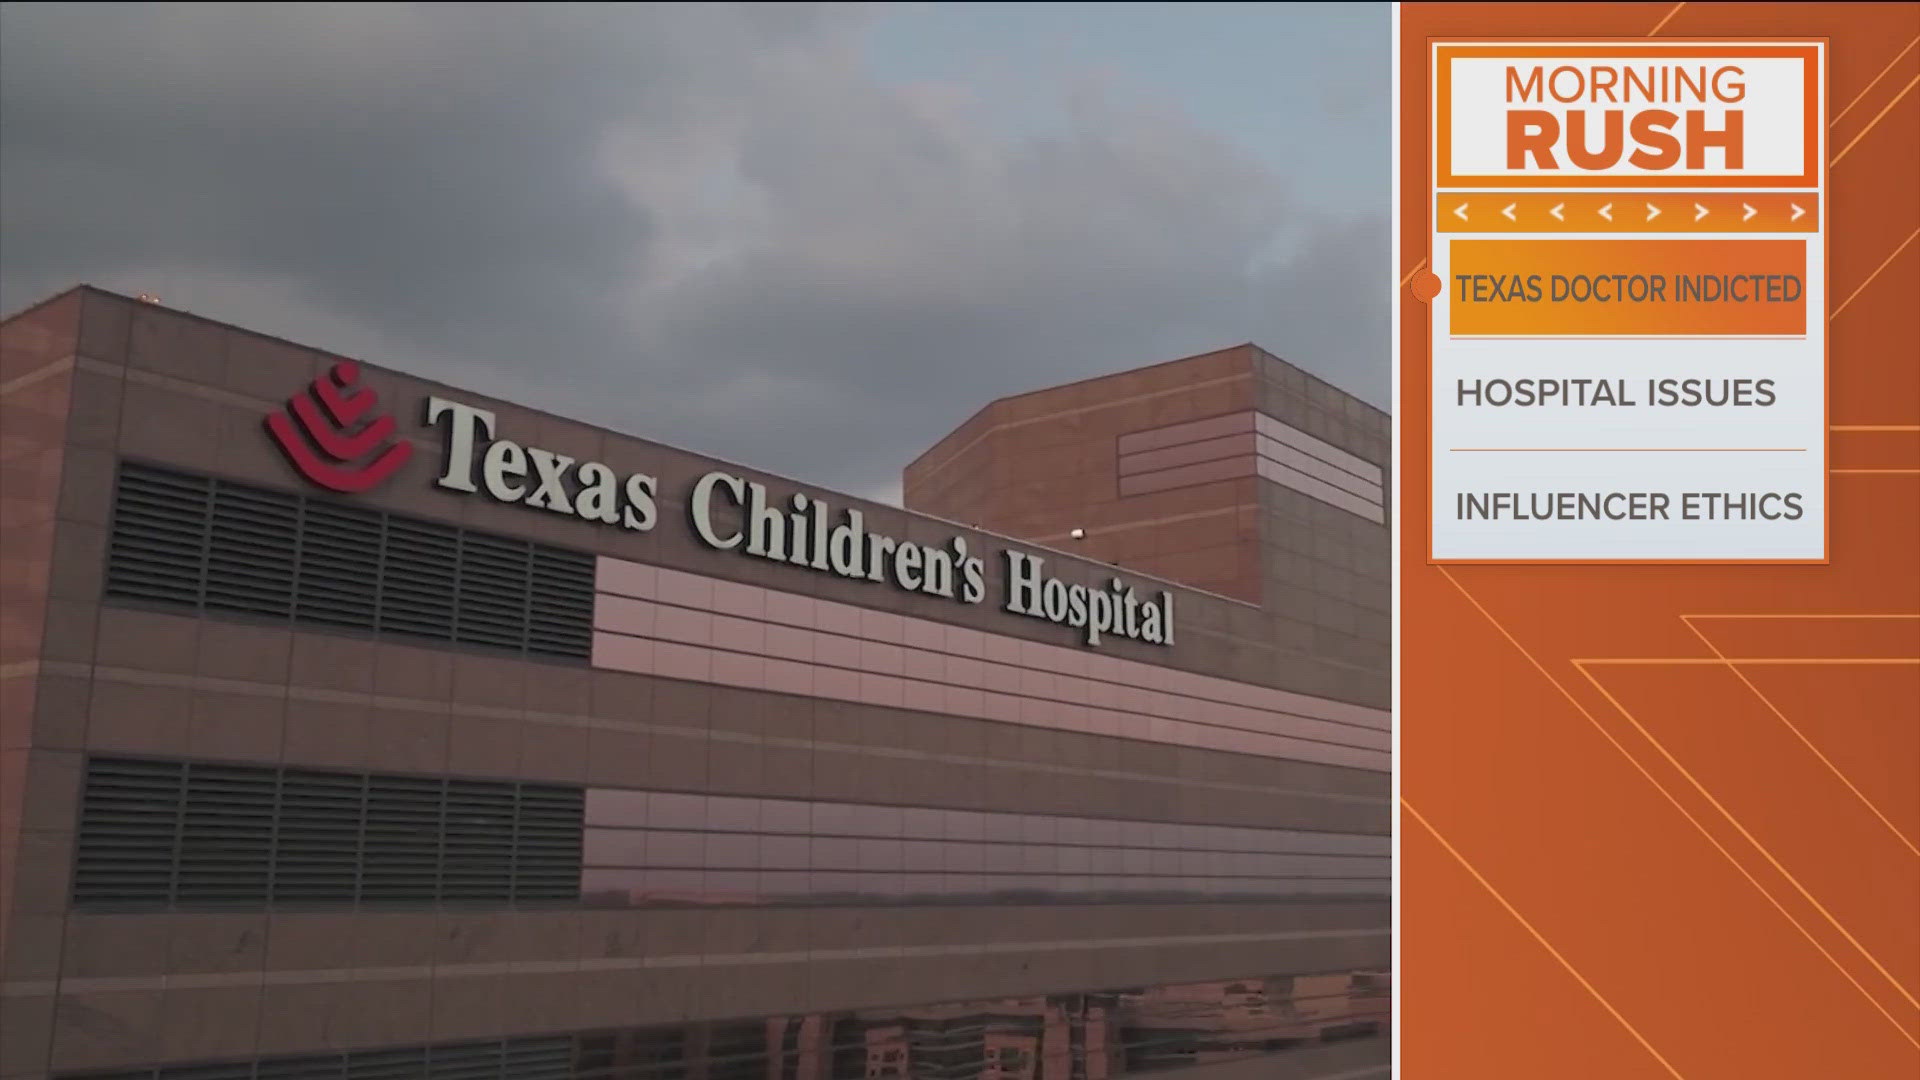 The Houston-based surgeon is being charged on four counts after accessing private patient information.